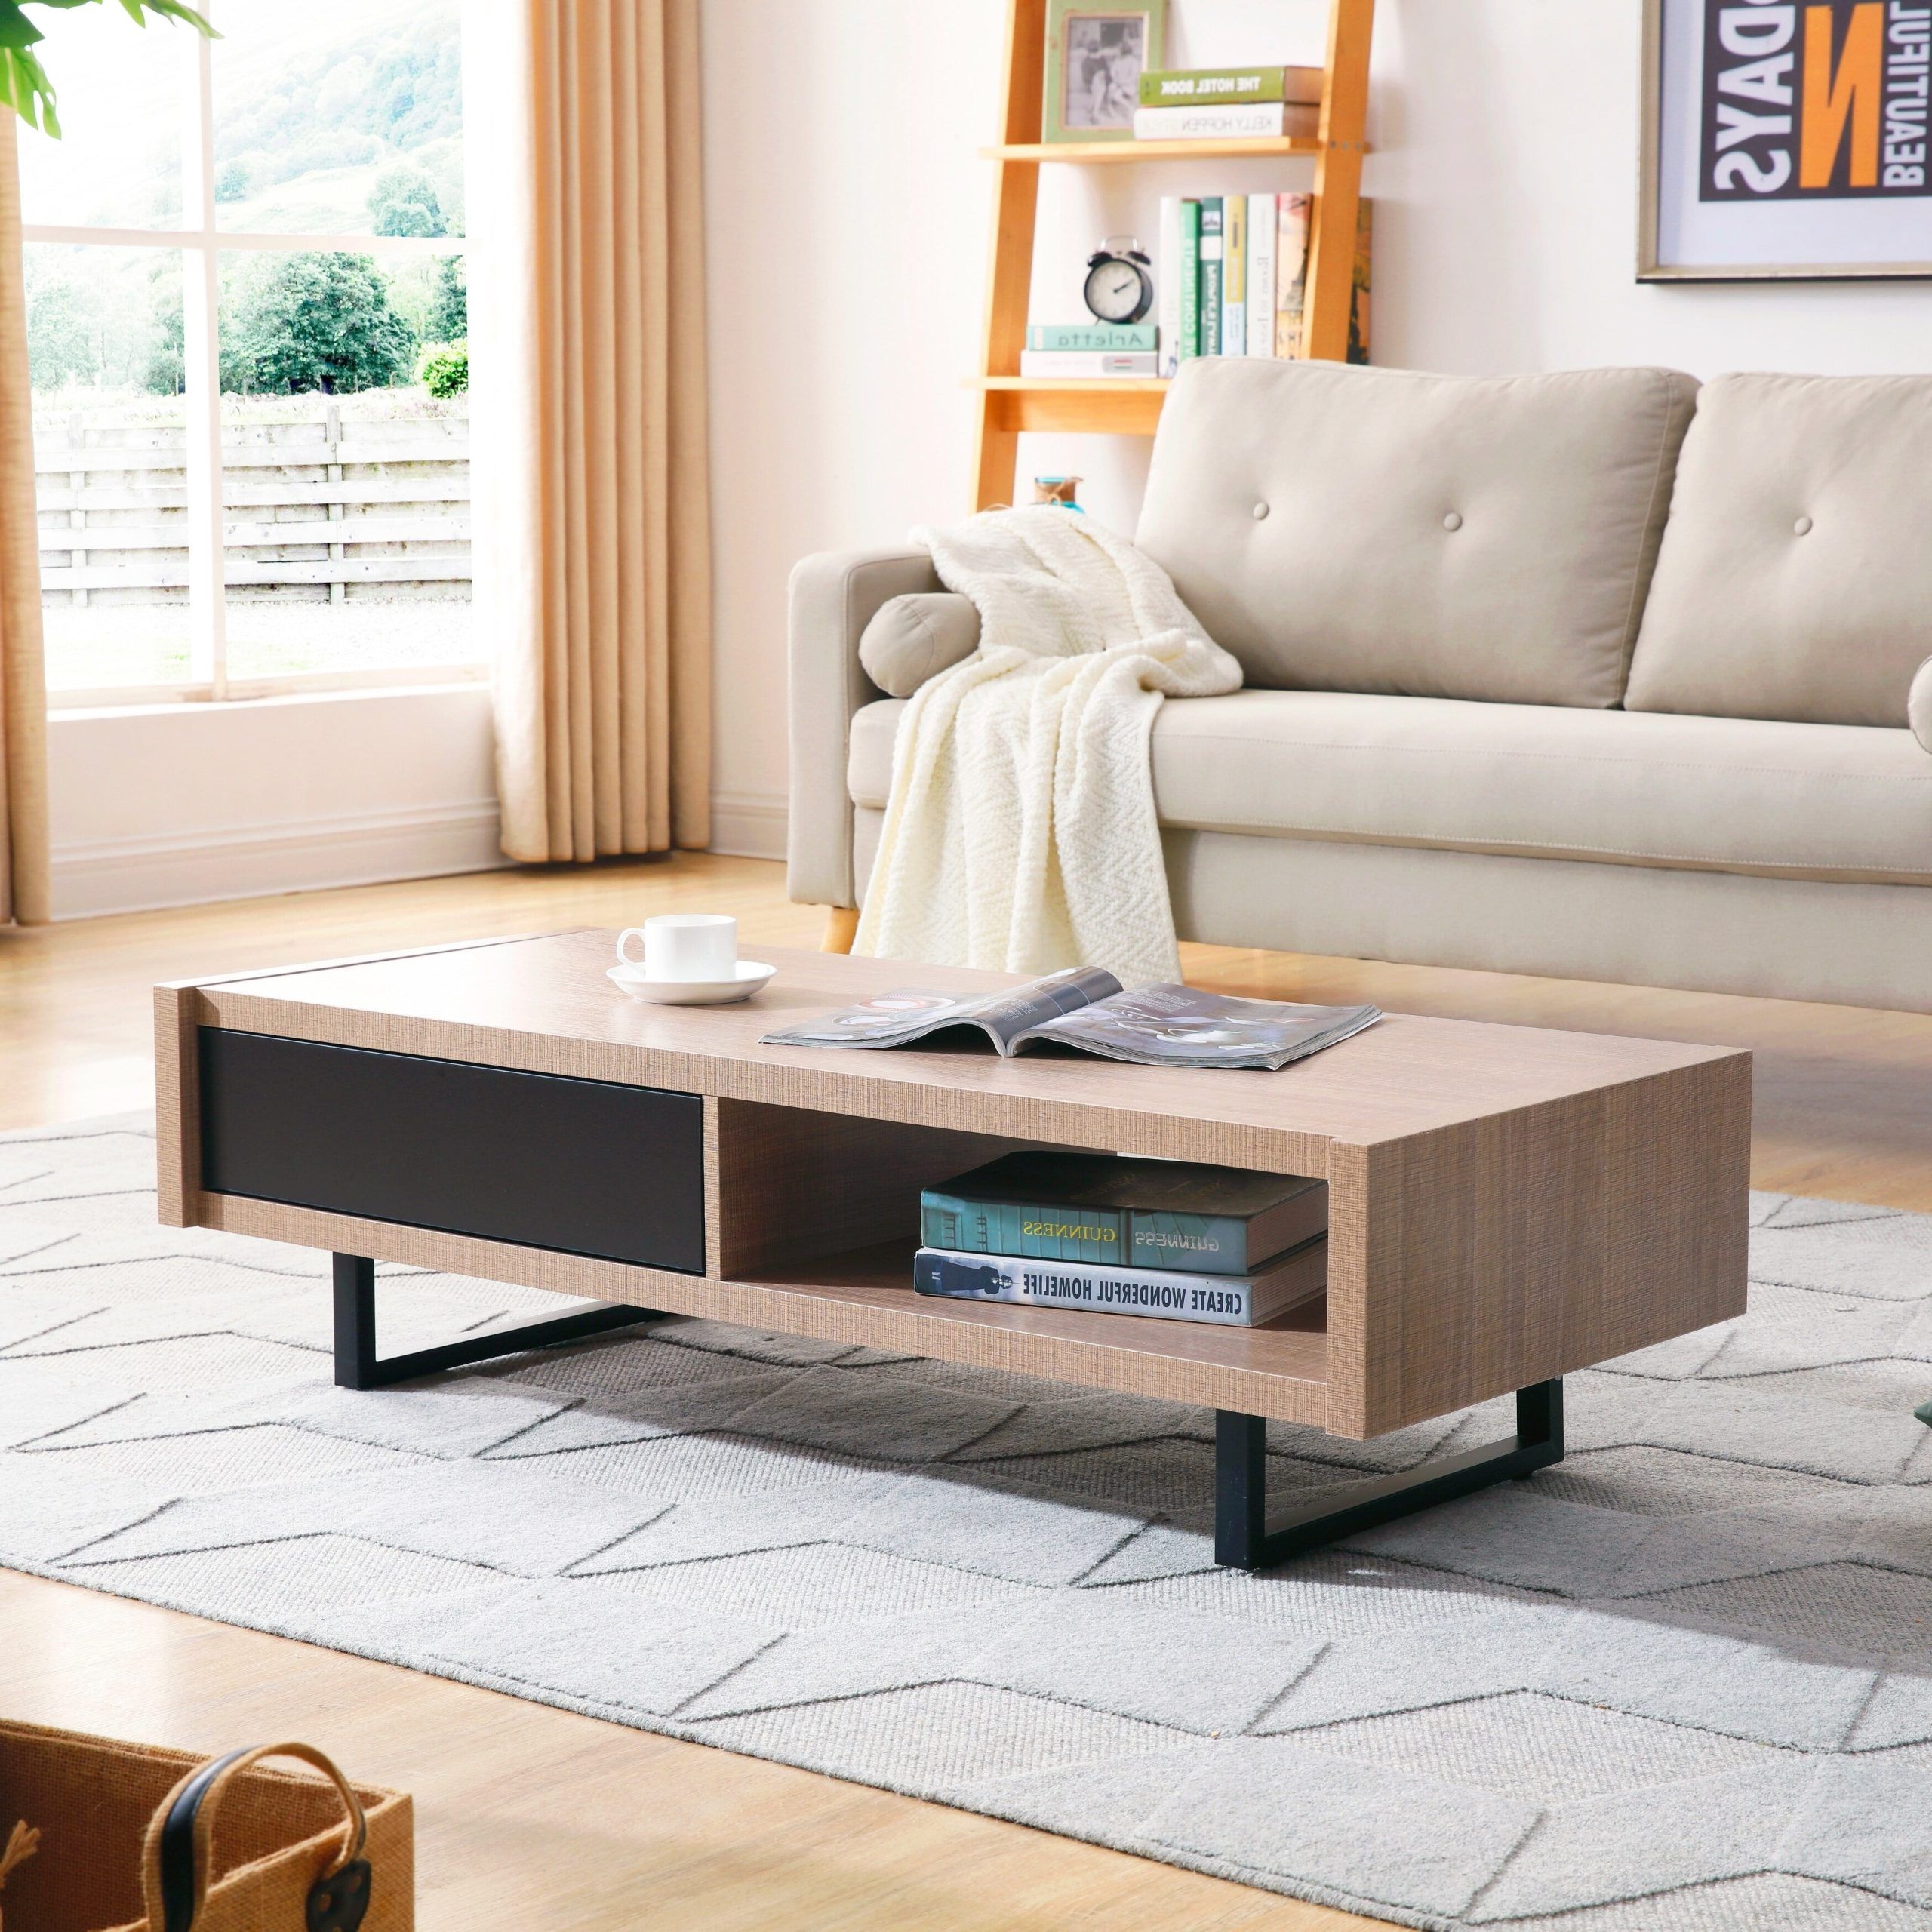 Mid Century Modern Ash Living Room Coffee Table, Tan – Walmart With Regard To Mid Century Modern Coffee Tables (View 16 of 20)